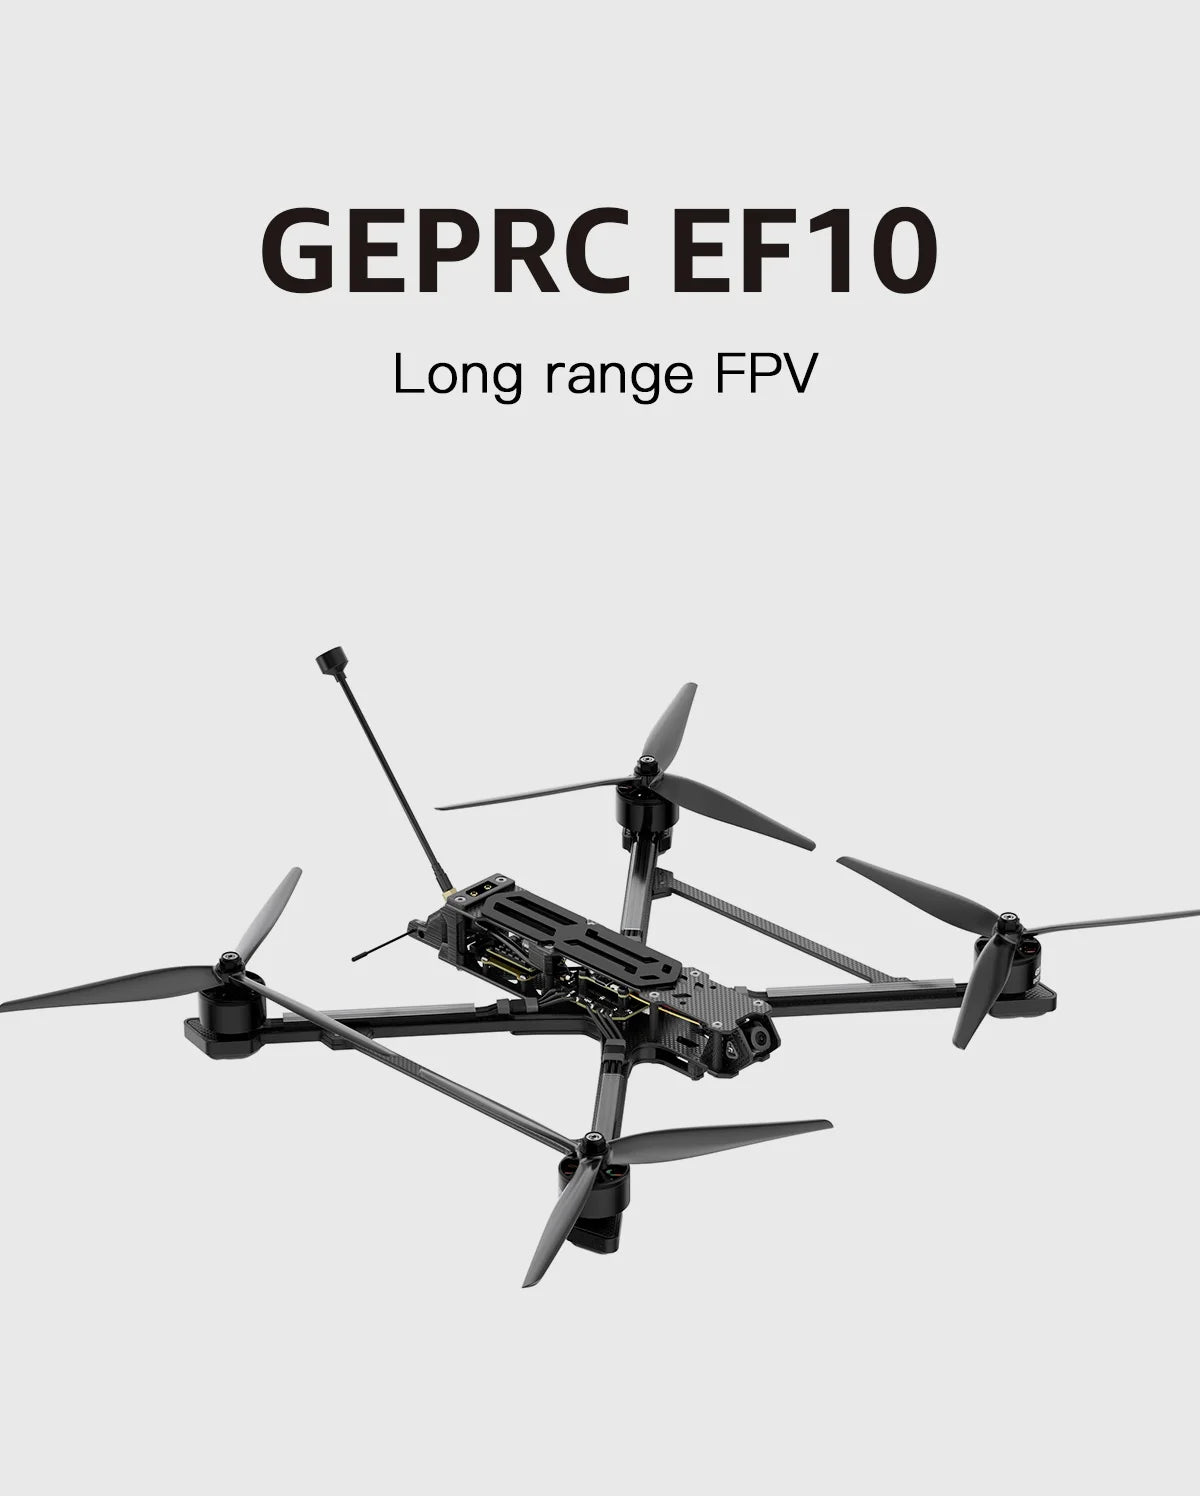 GEPRC EF10 5.8G 1.6W Long Range 10inch FPV, Crashes or fire damage caused by non-manufacturing factors, including pilot errors 